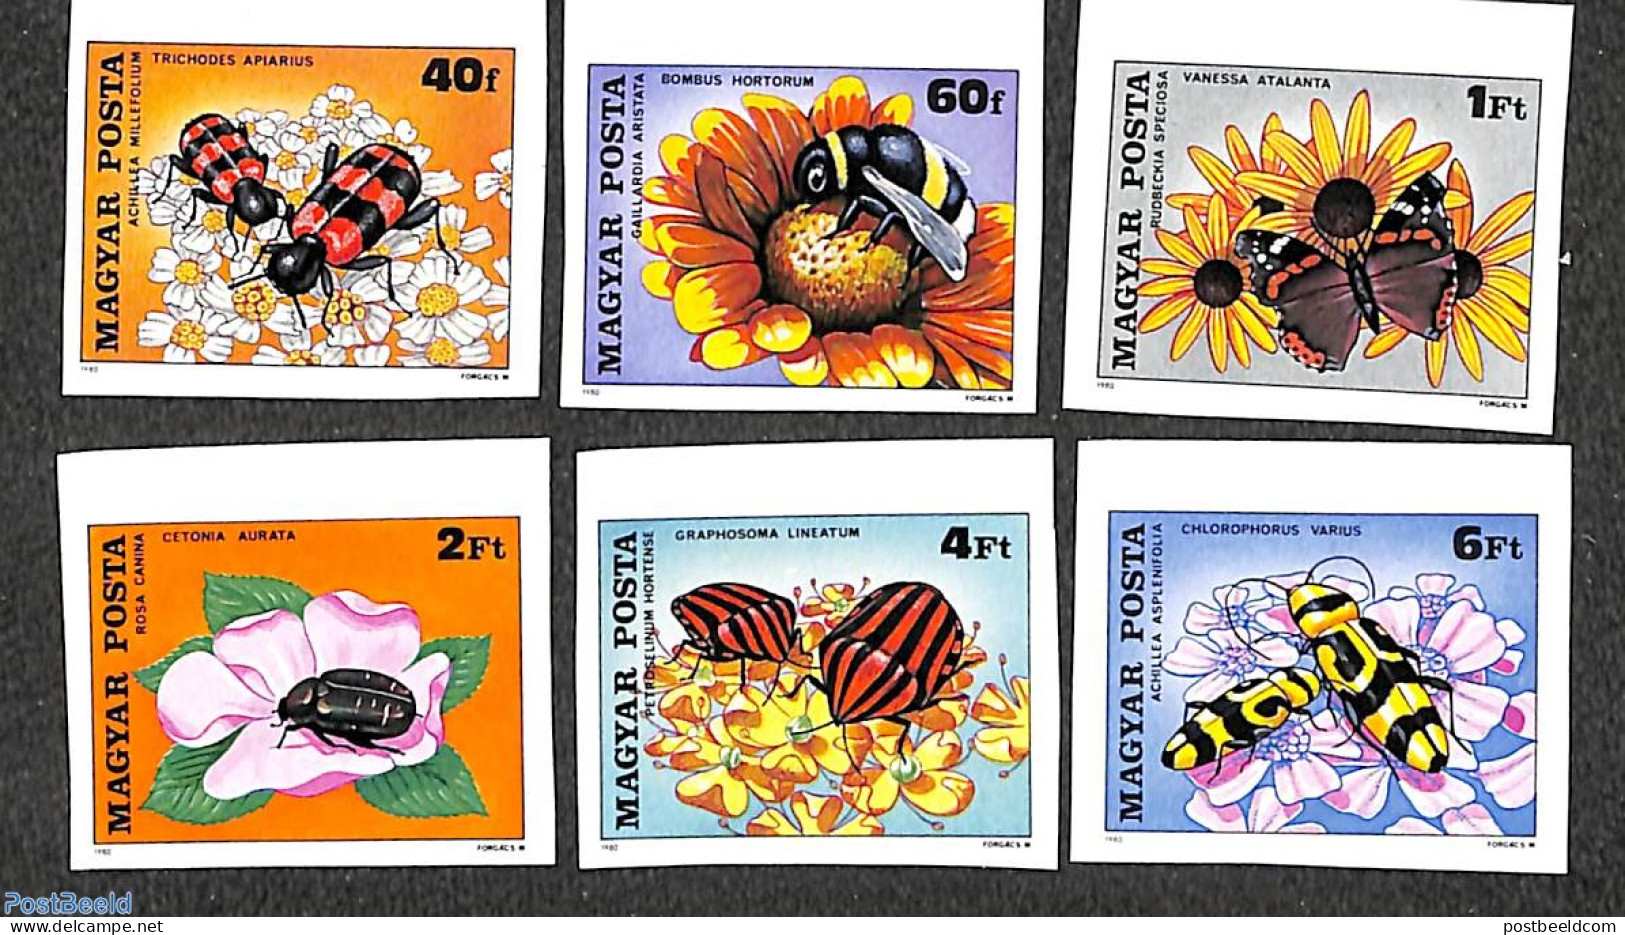 Hungary 1980 Flowers & Insects 6v Imperforated, Mint NH, Nature - Bees - Flowers & Plants - Insects - Neufs